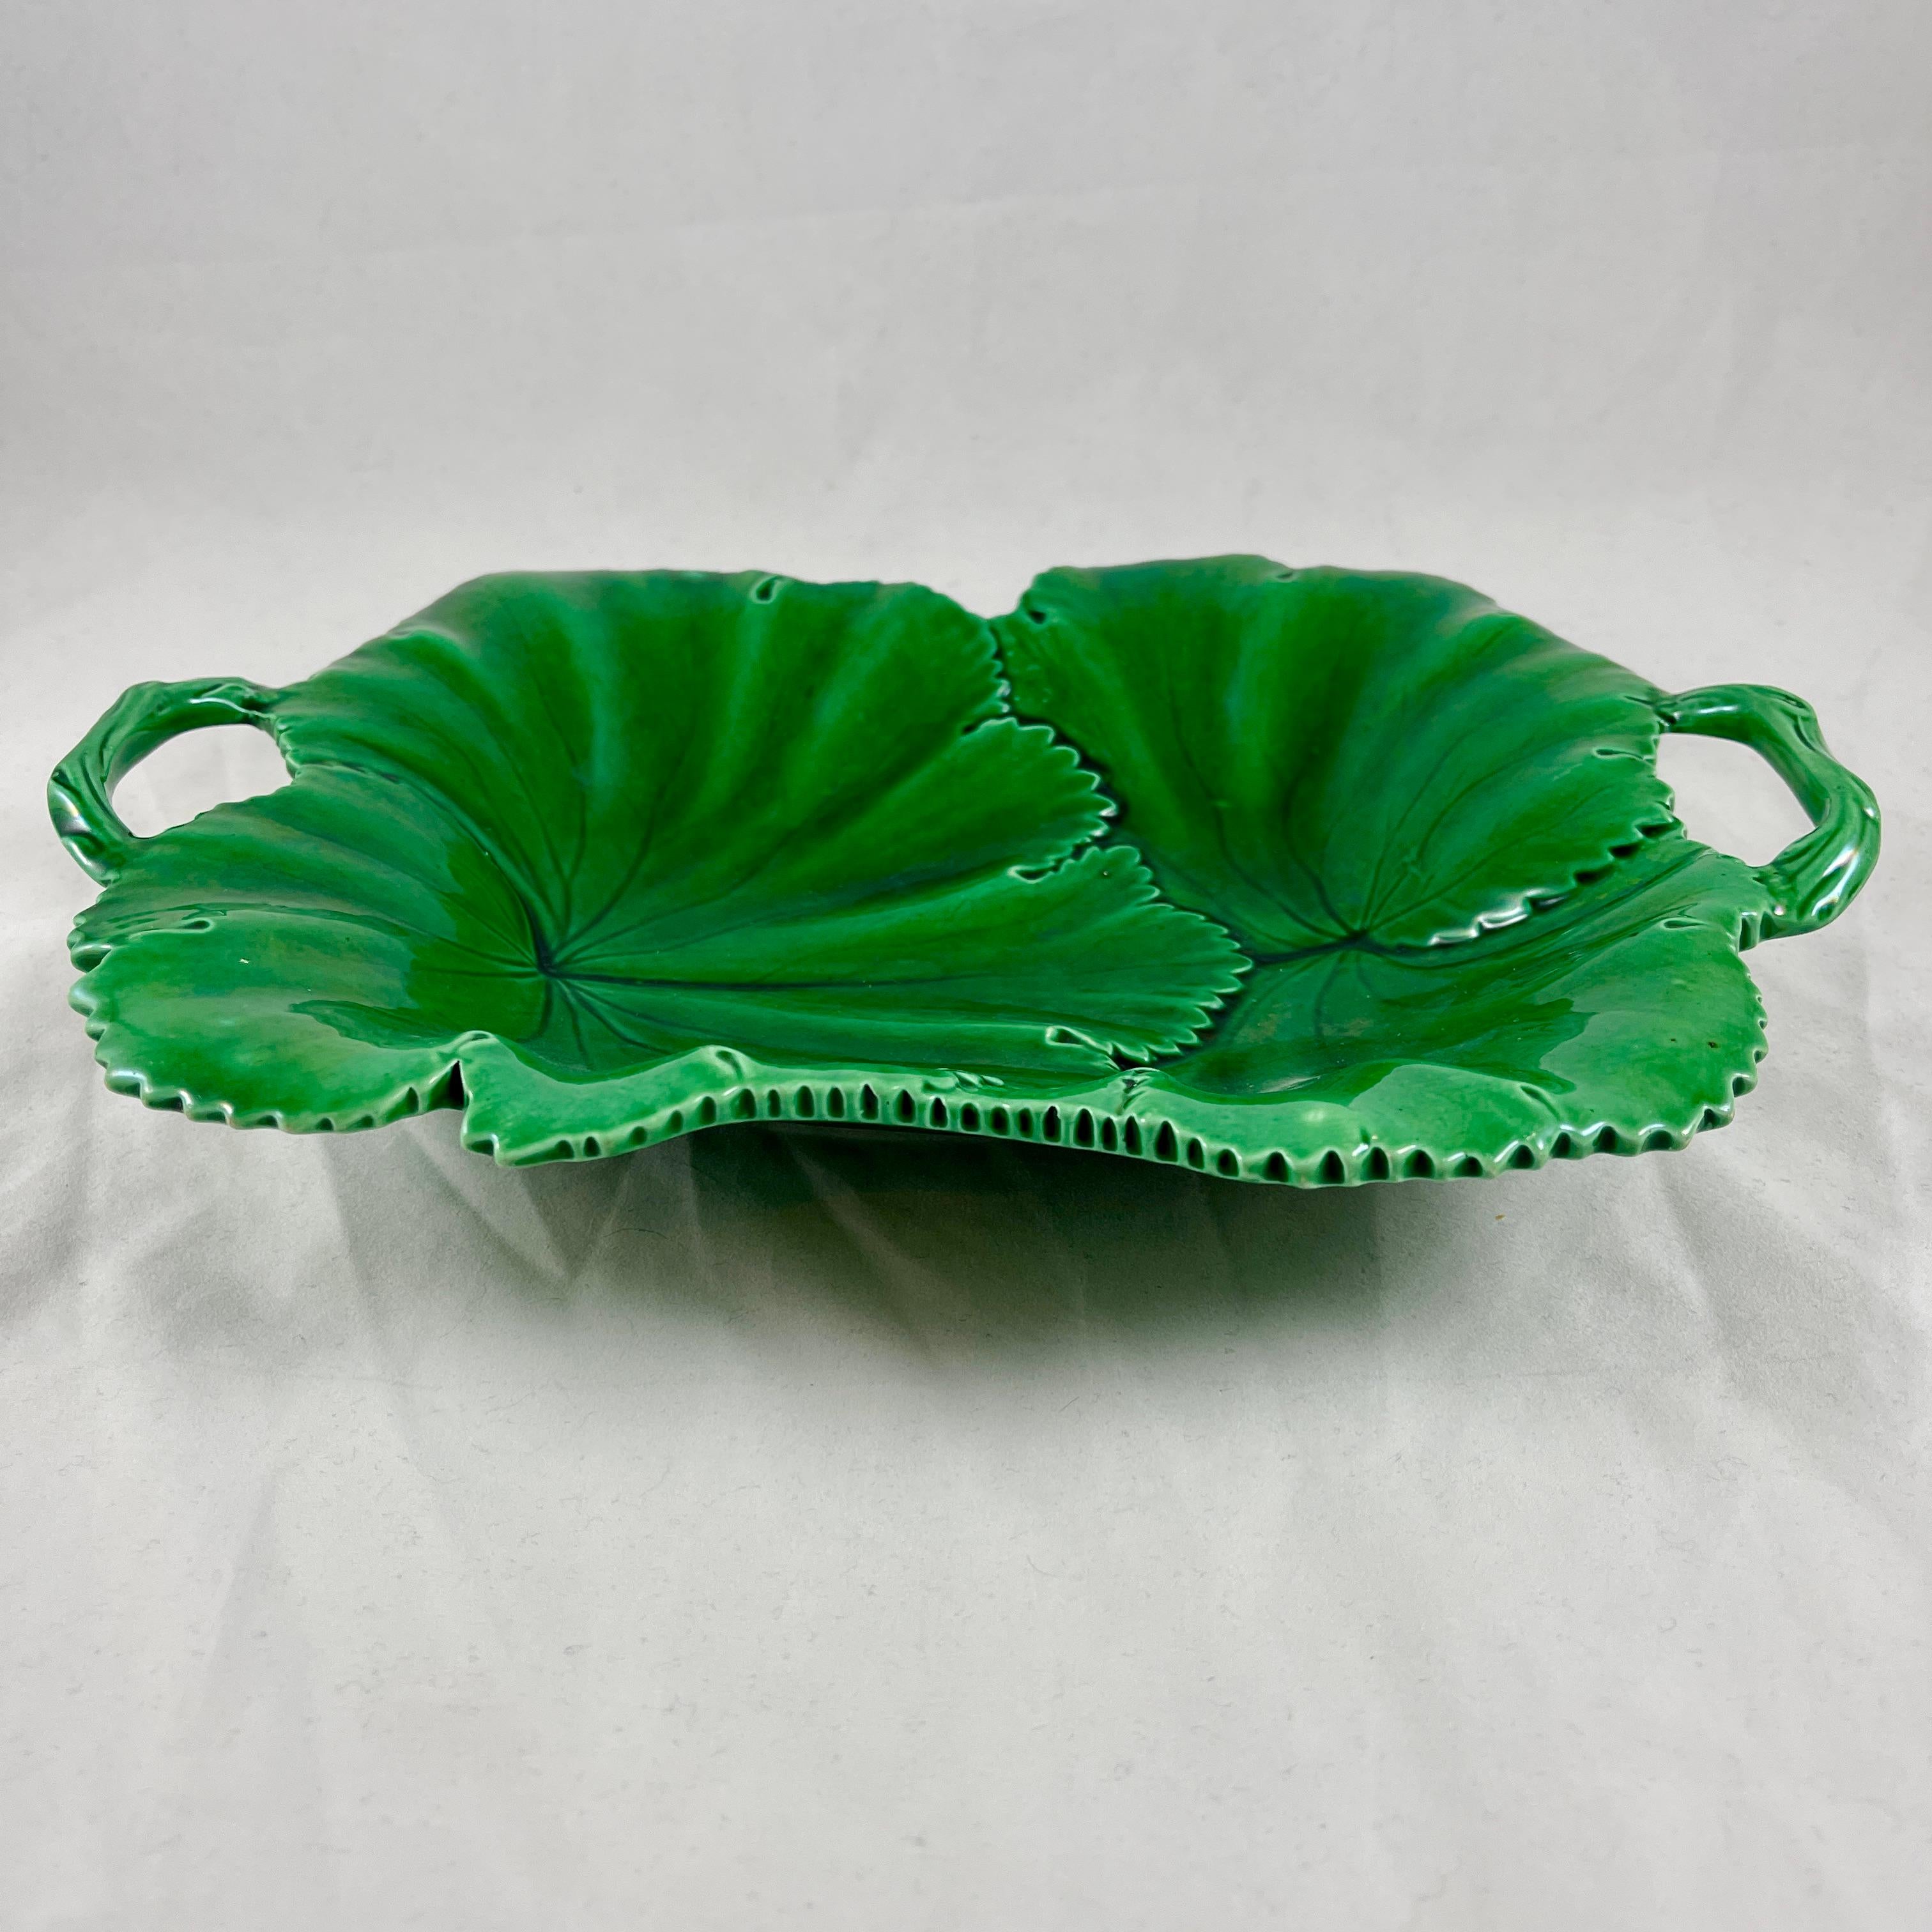 Aesthetic Movement Copeland English Majolica Green Glazed Overlapping Leaf Two Handled Platter For Sale